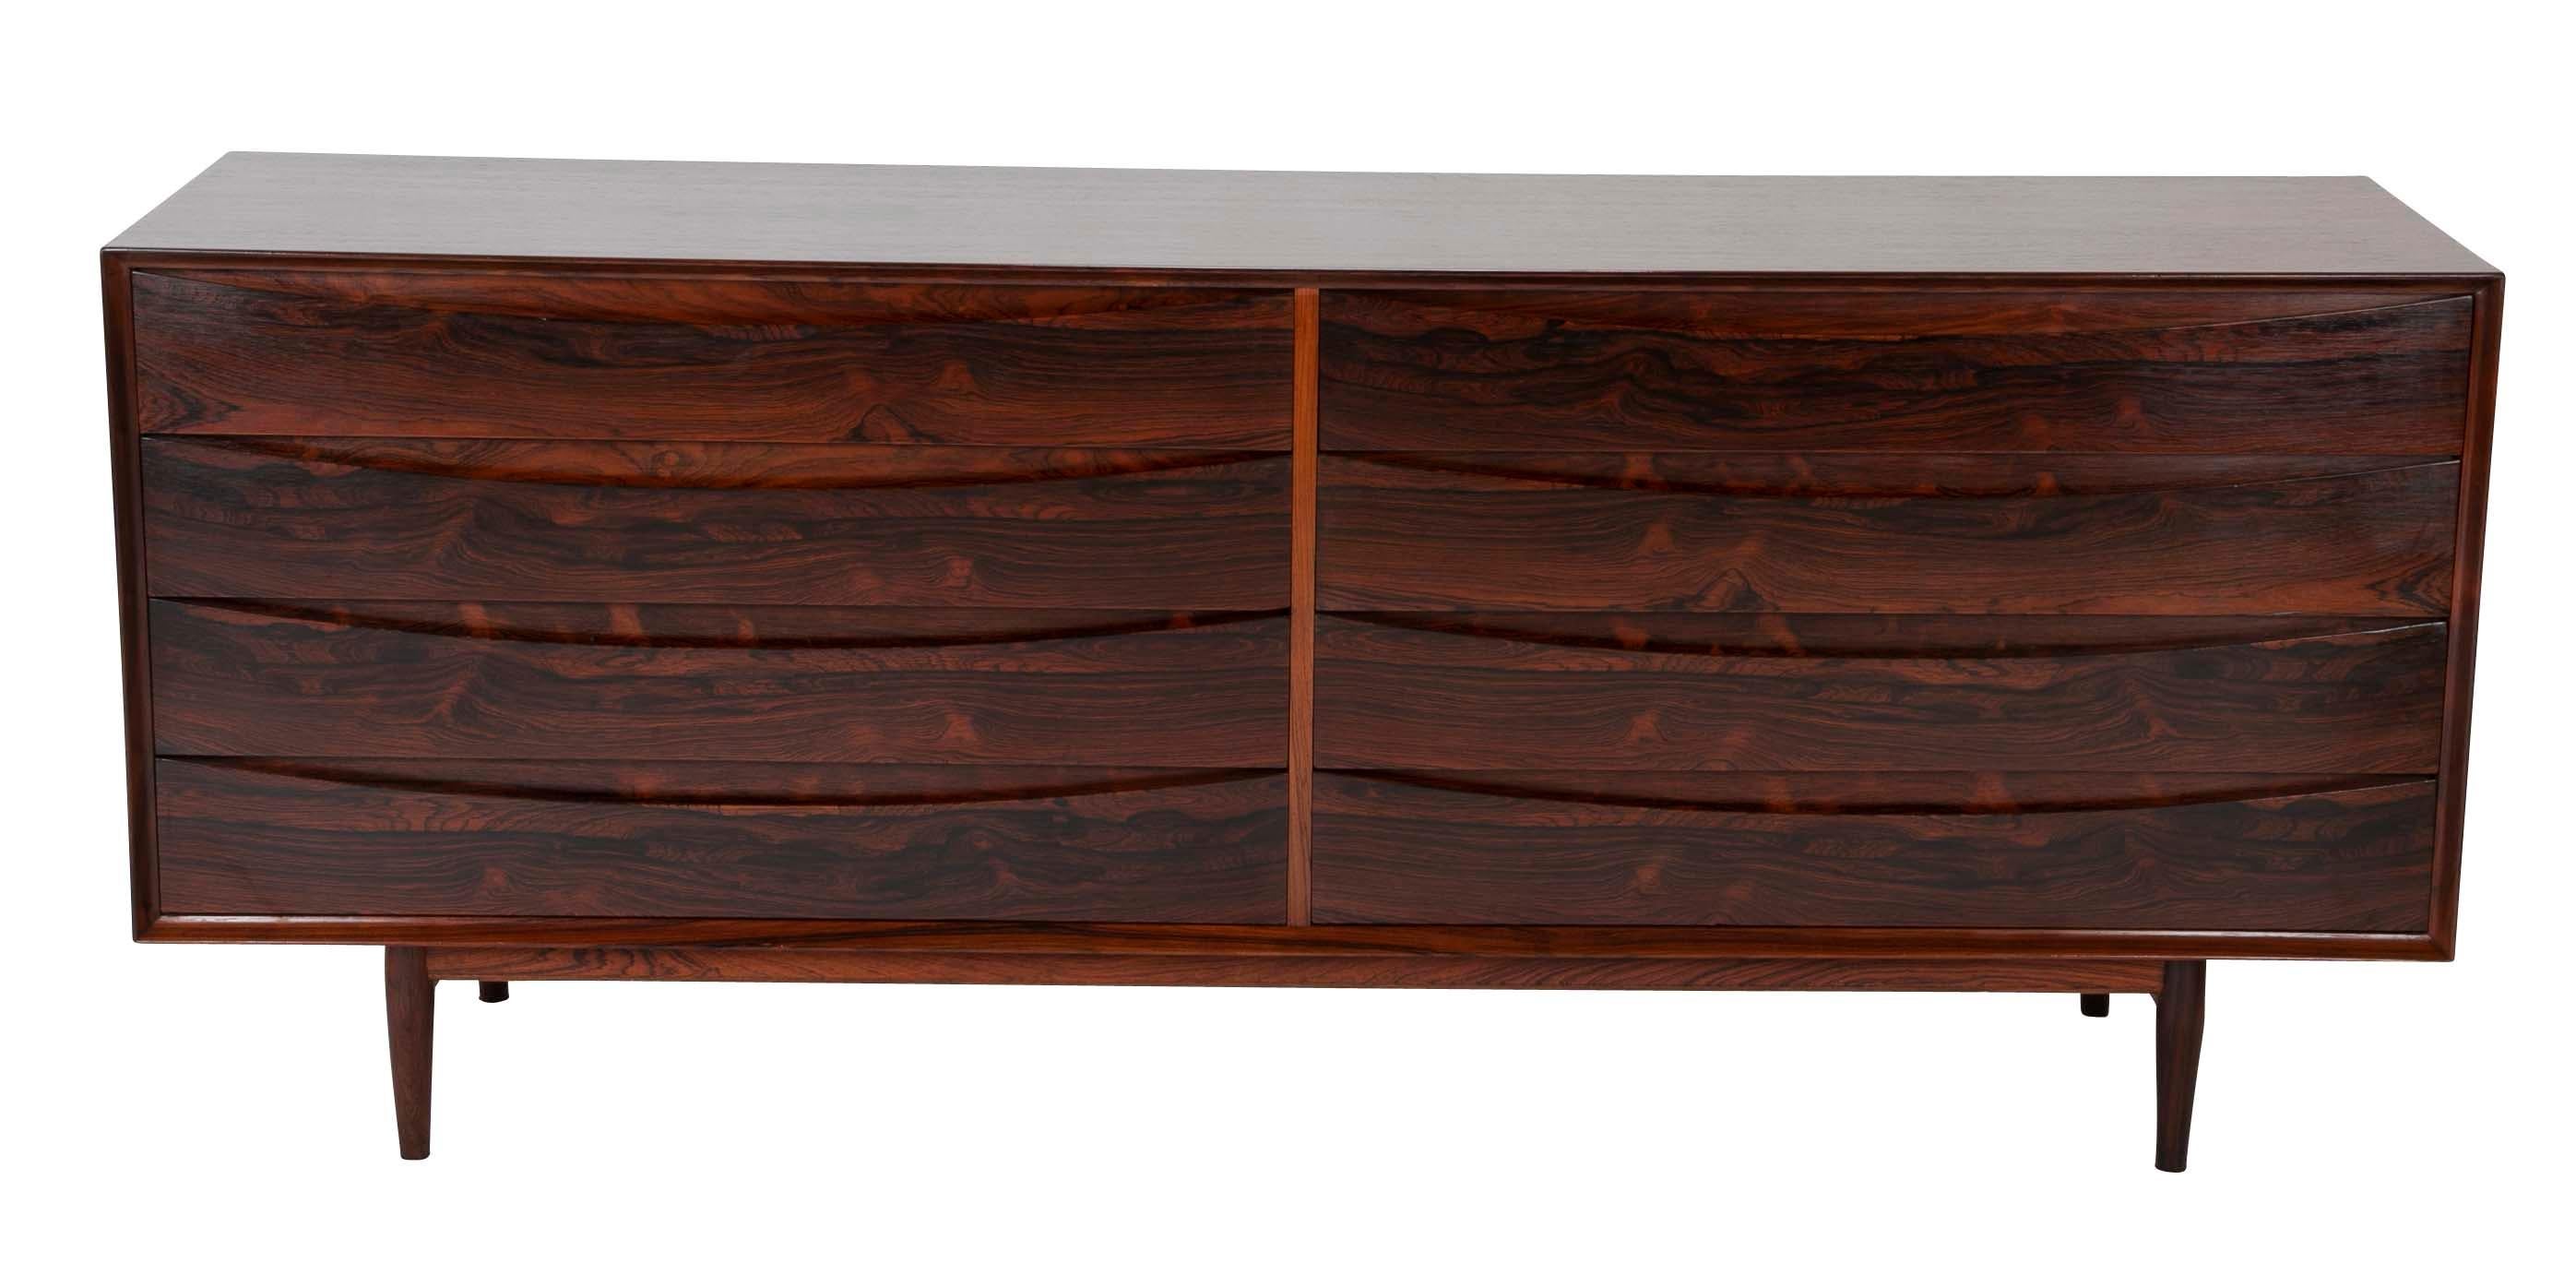 A Danish eight-drawer chest with elliptical shaped drawers pulls. Executed in Brazilian Rosewood. Designed by Arne Vodder for Sibast Mobler, Danish, circa 1950. Marked in drawer.